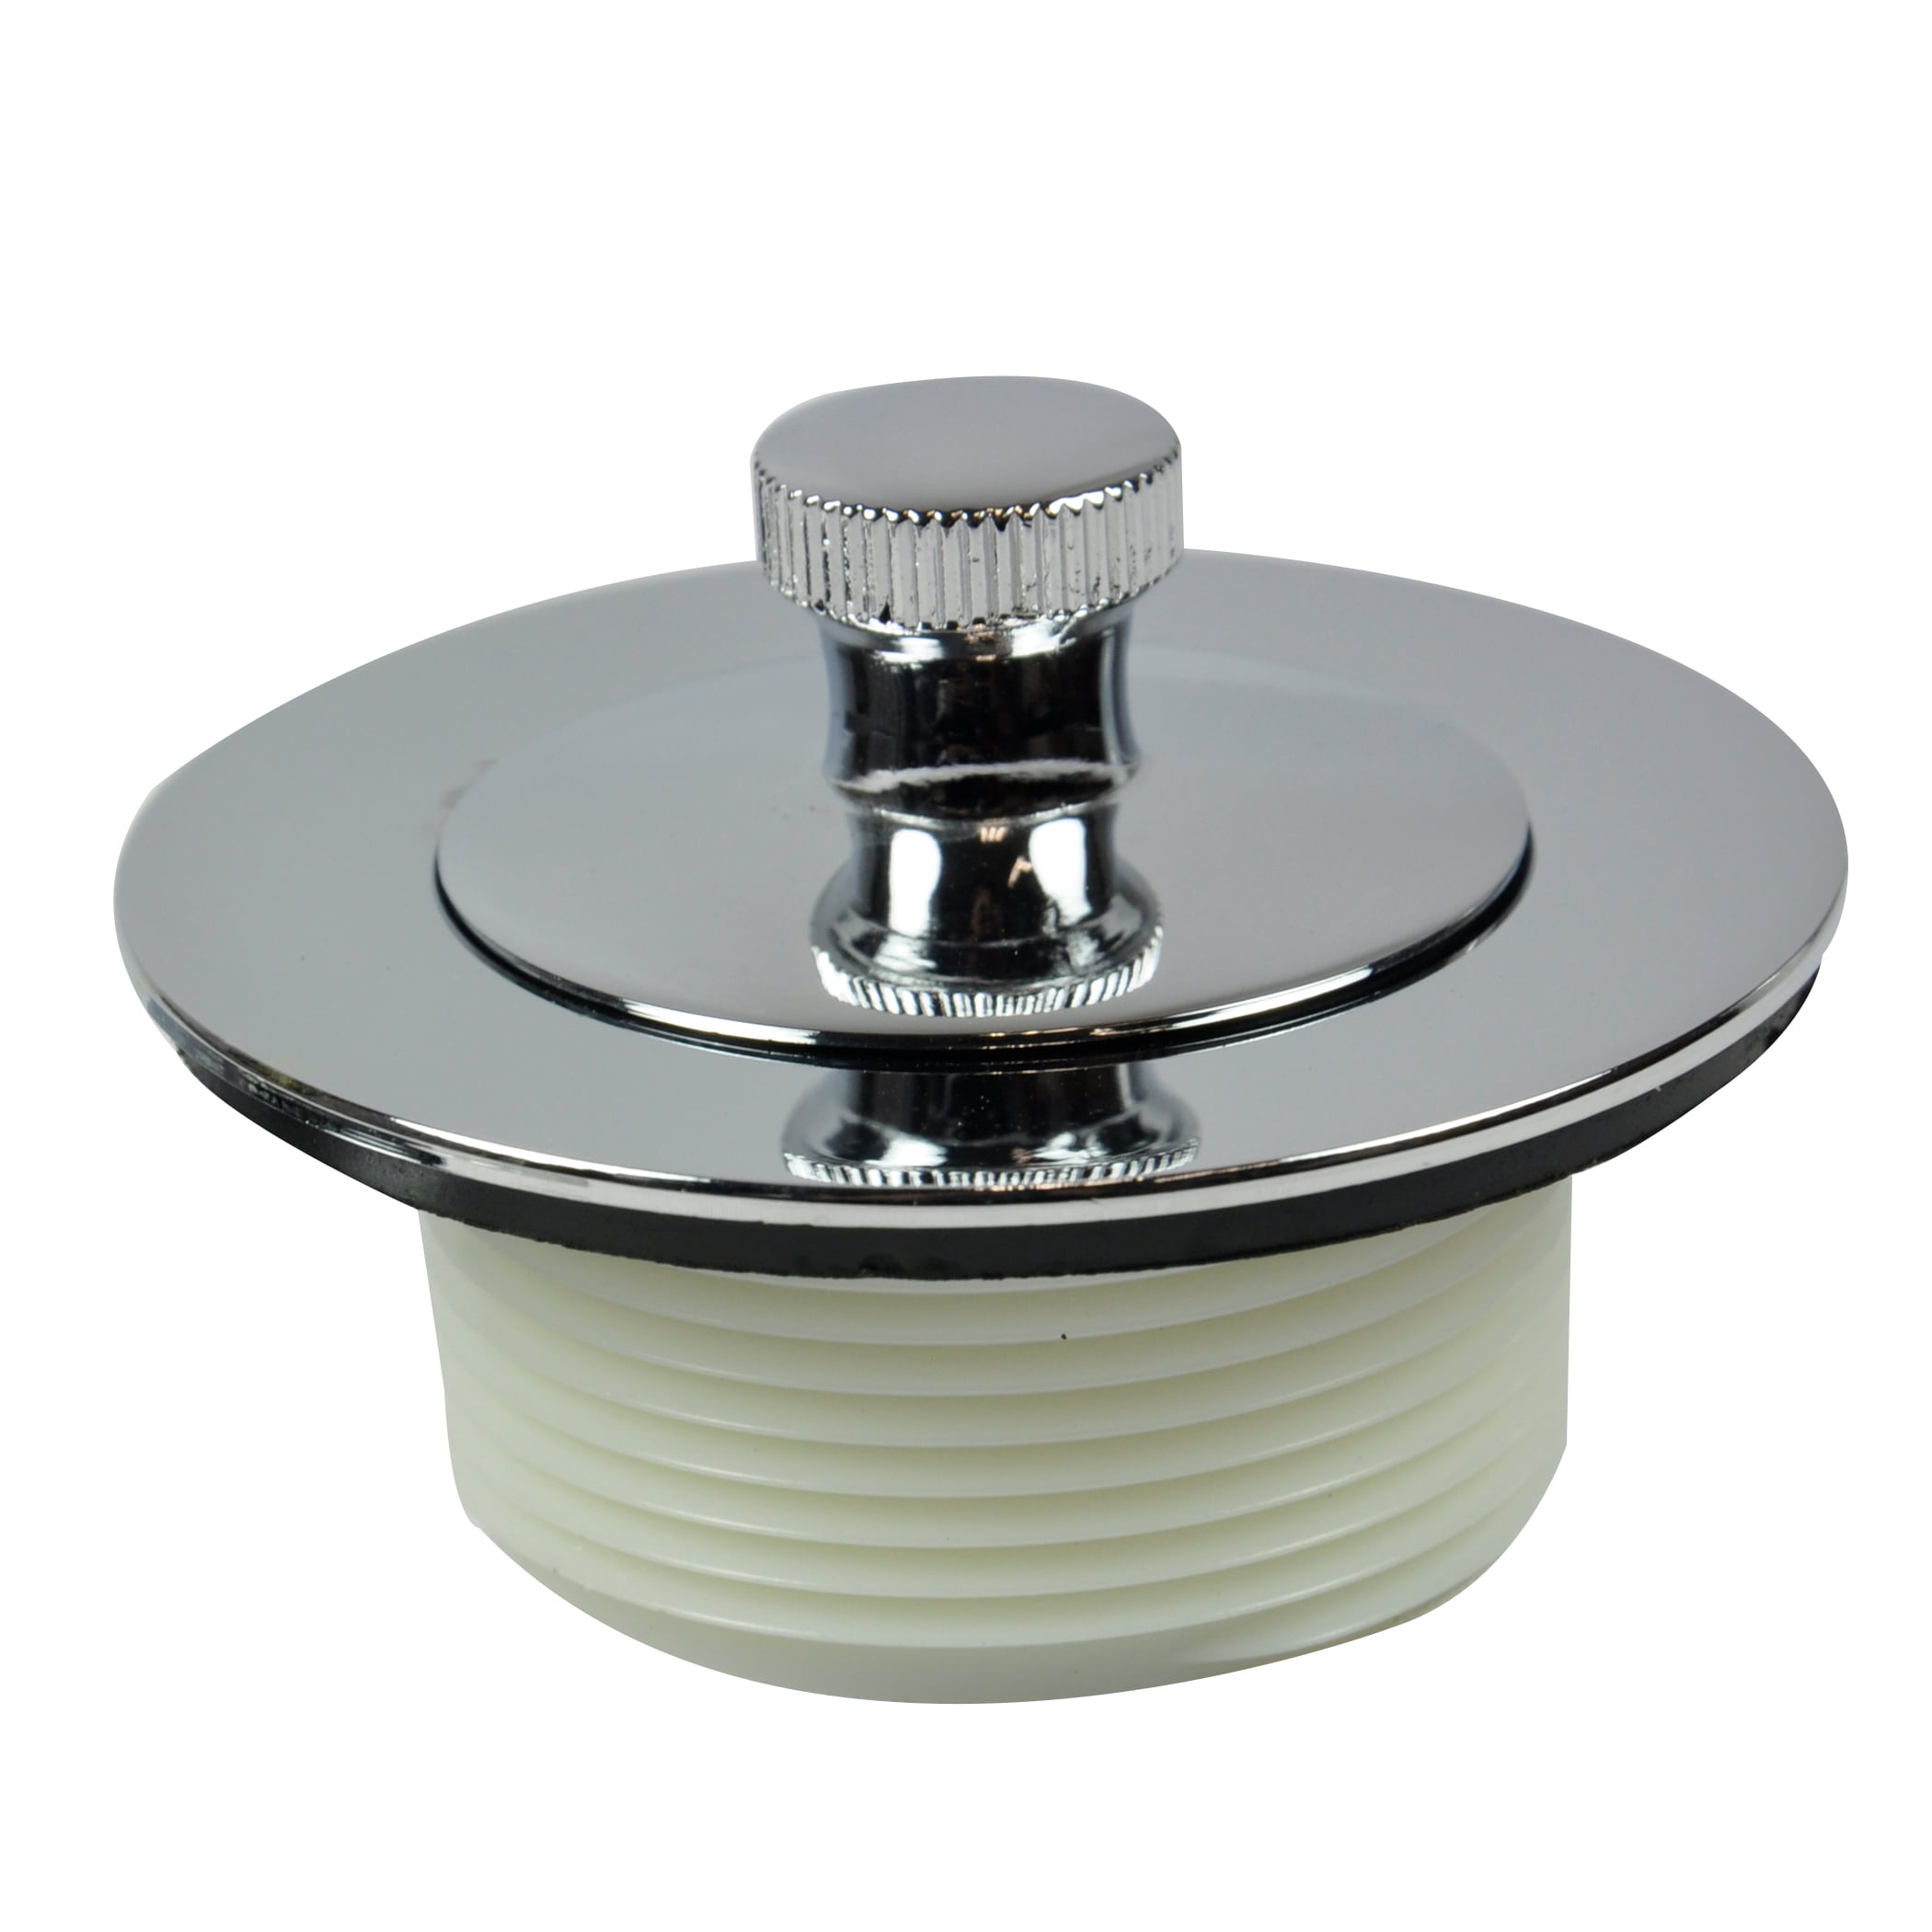 Danco Standard Size PVC Lift Out Tub Drain Strainer - Fort Mitchell, AL -  Fort Mitchell Trading Post & Hardware